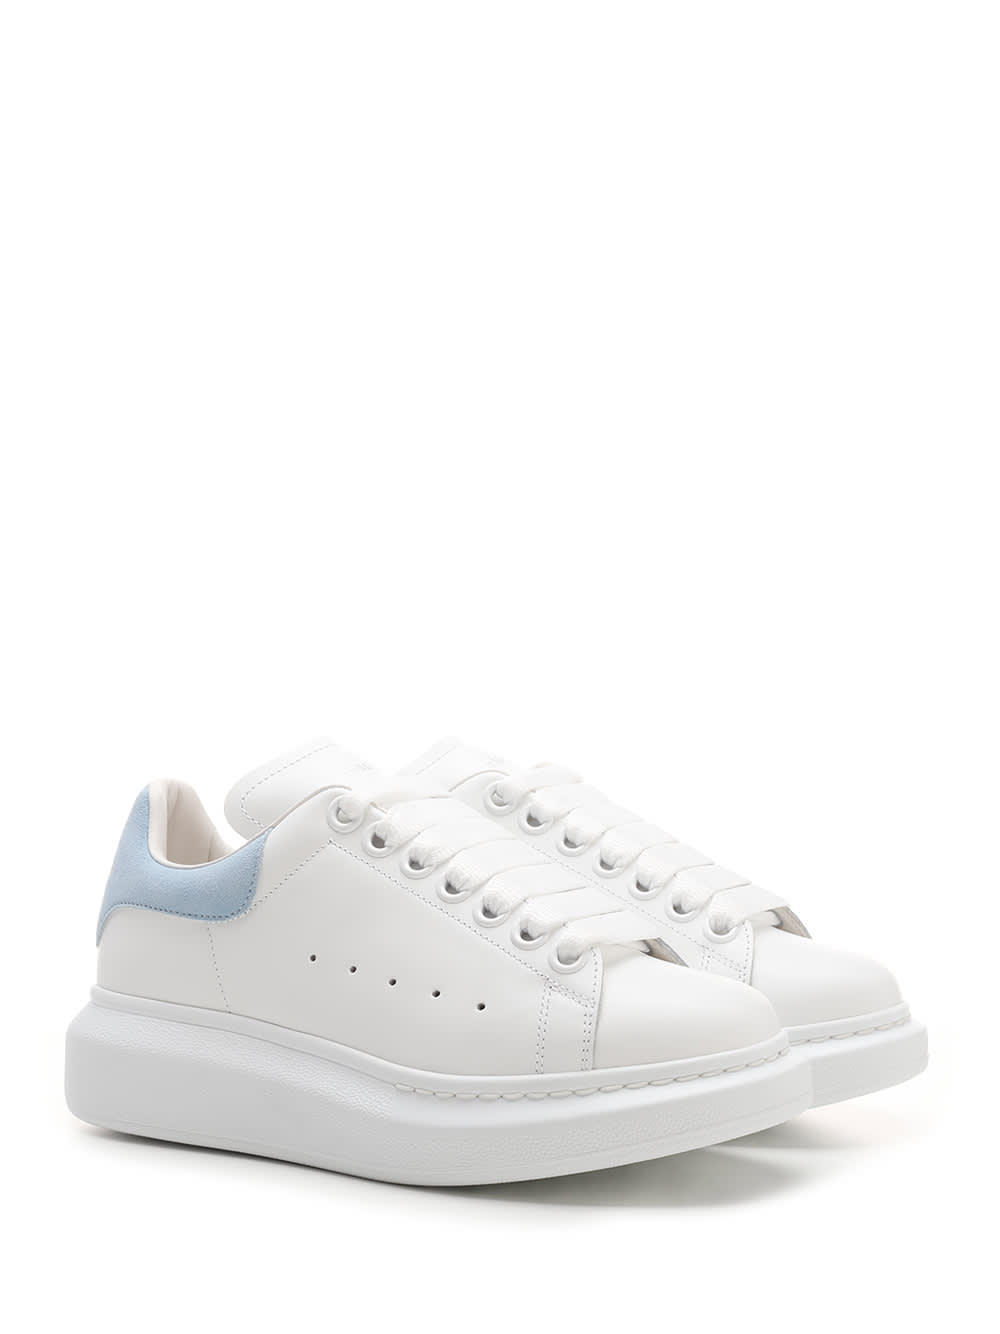 Shop Alexander Mcqueen Oversize Pure White Sneakers In White/powder Blue